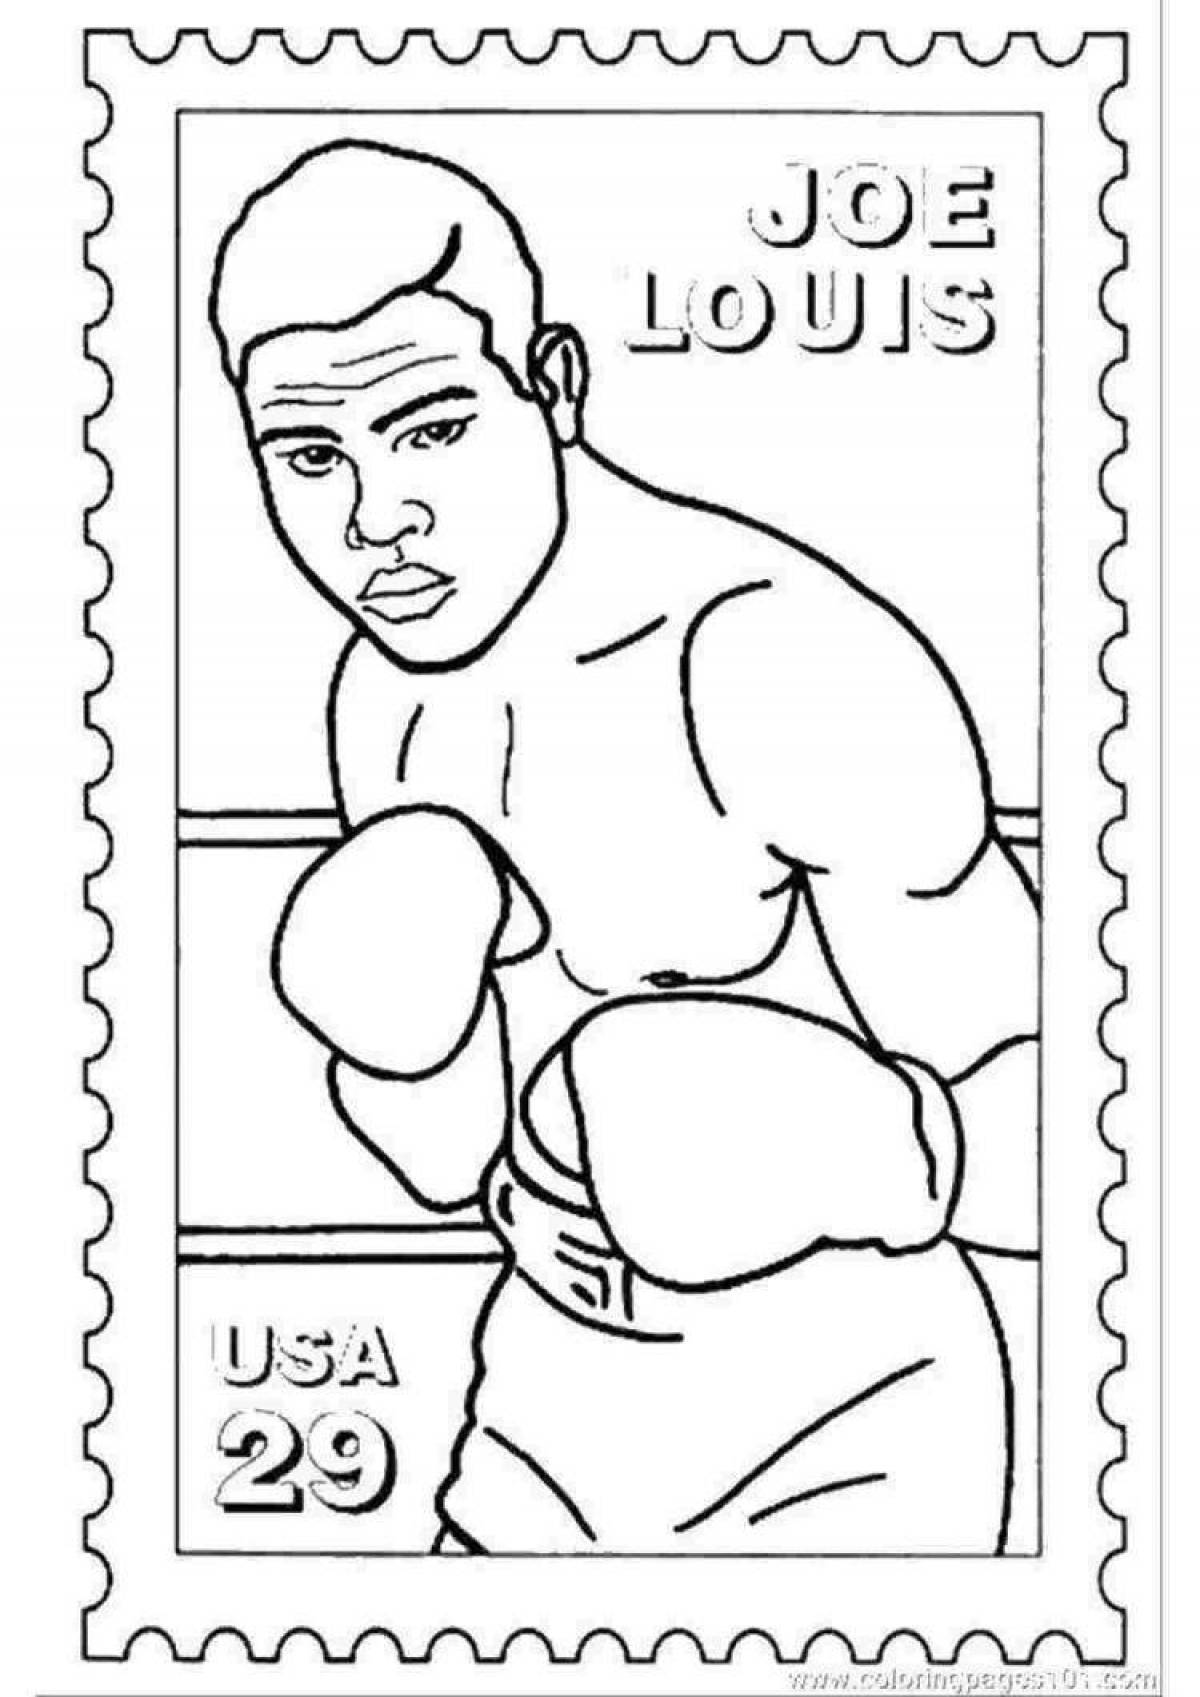 Comic boxing coloring book for kids